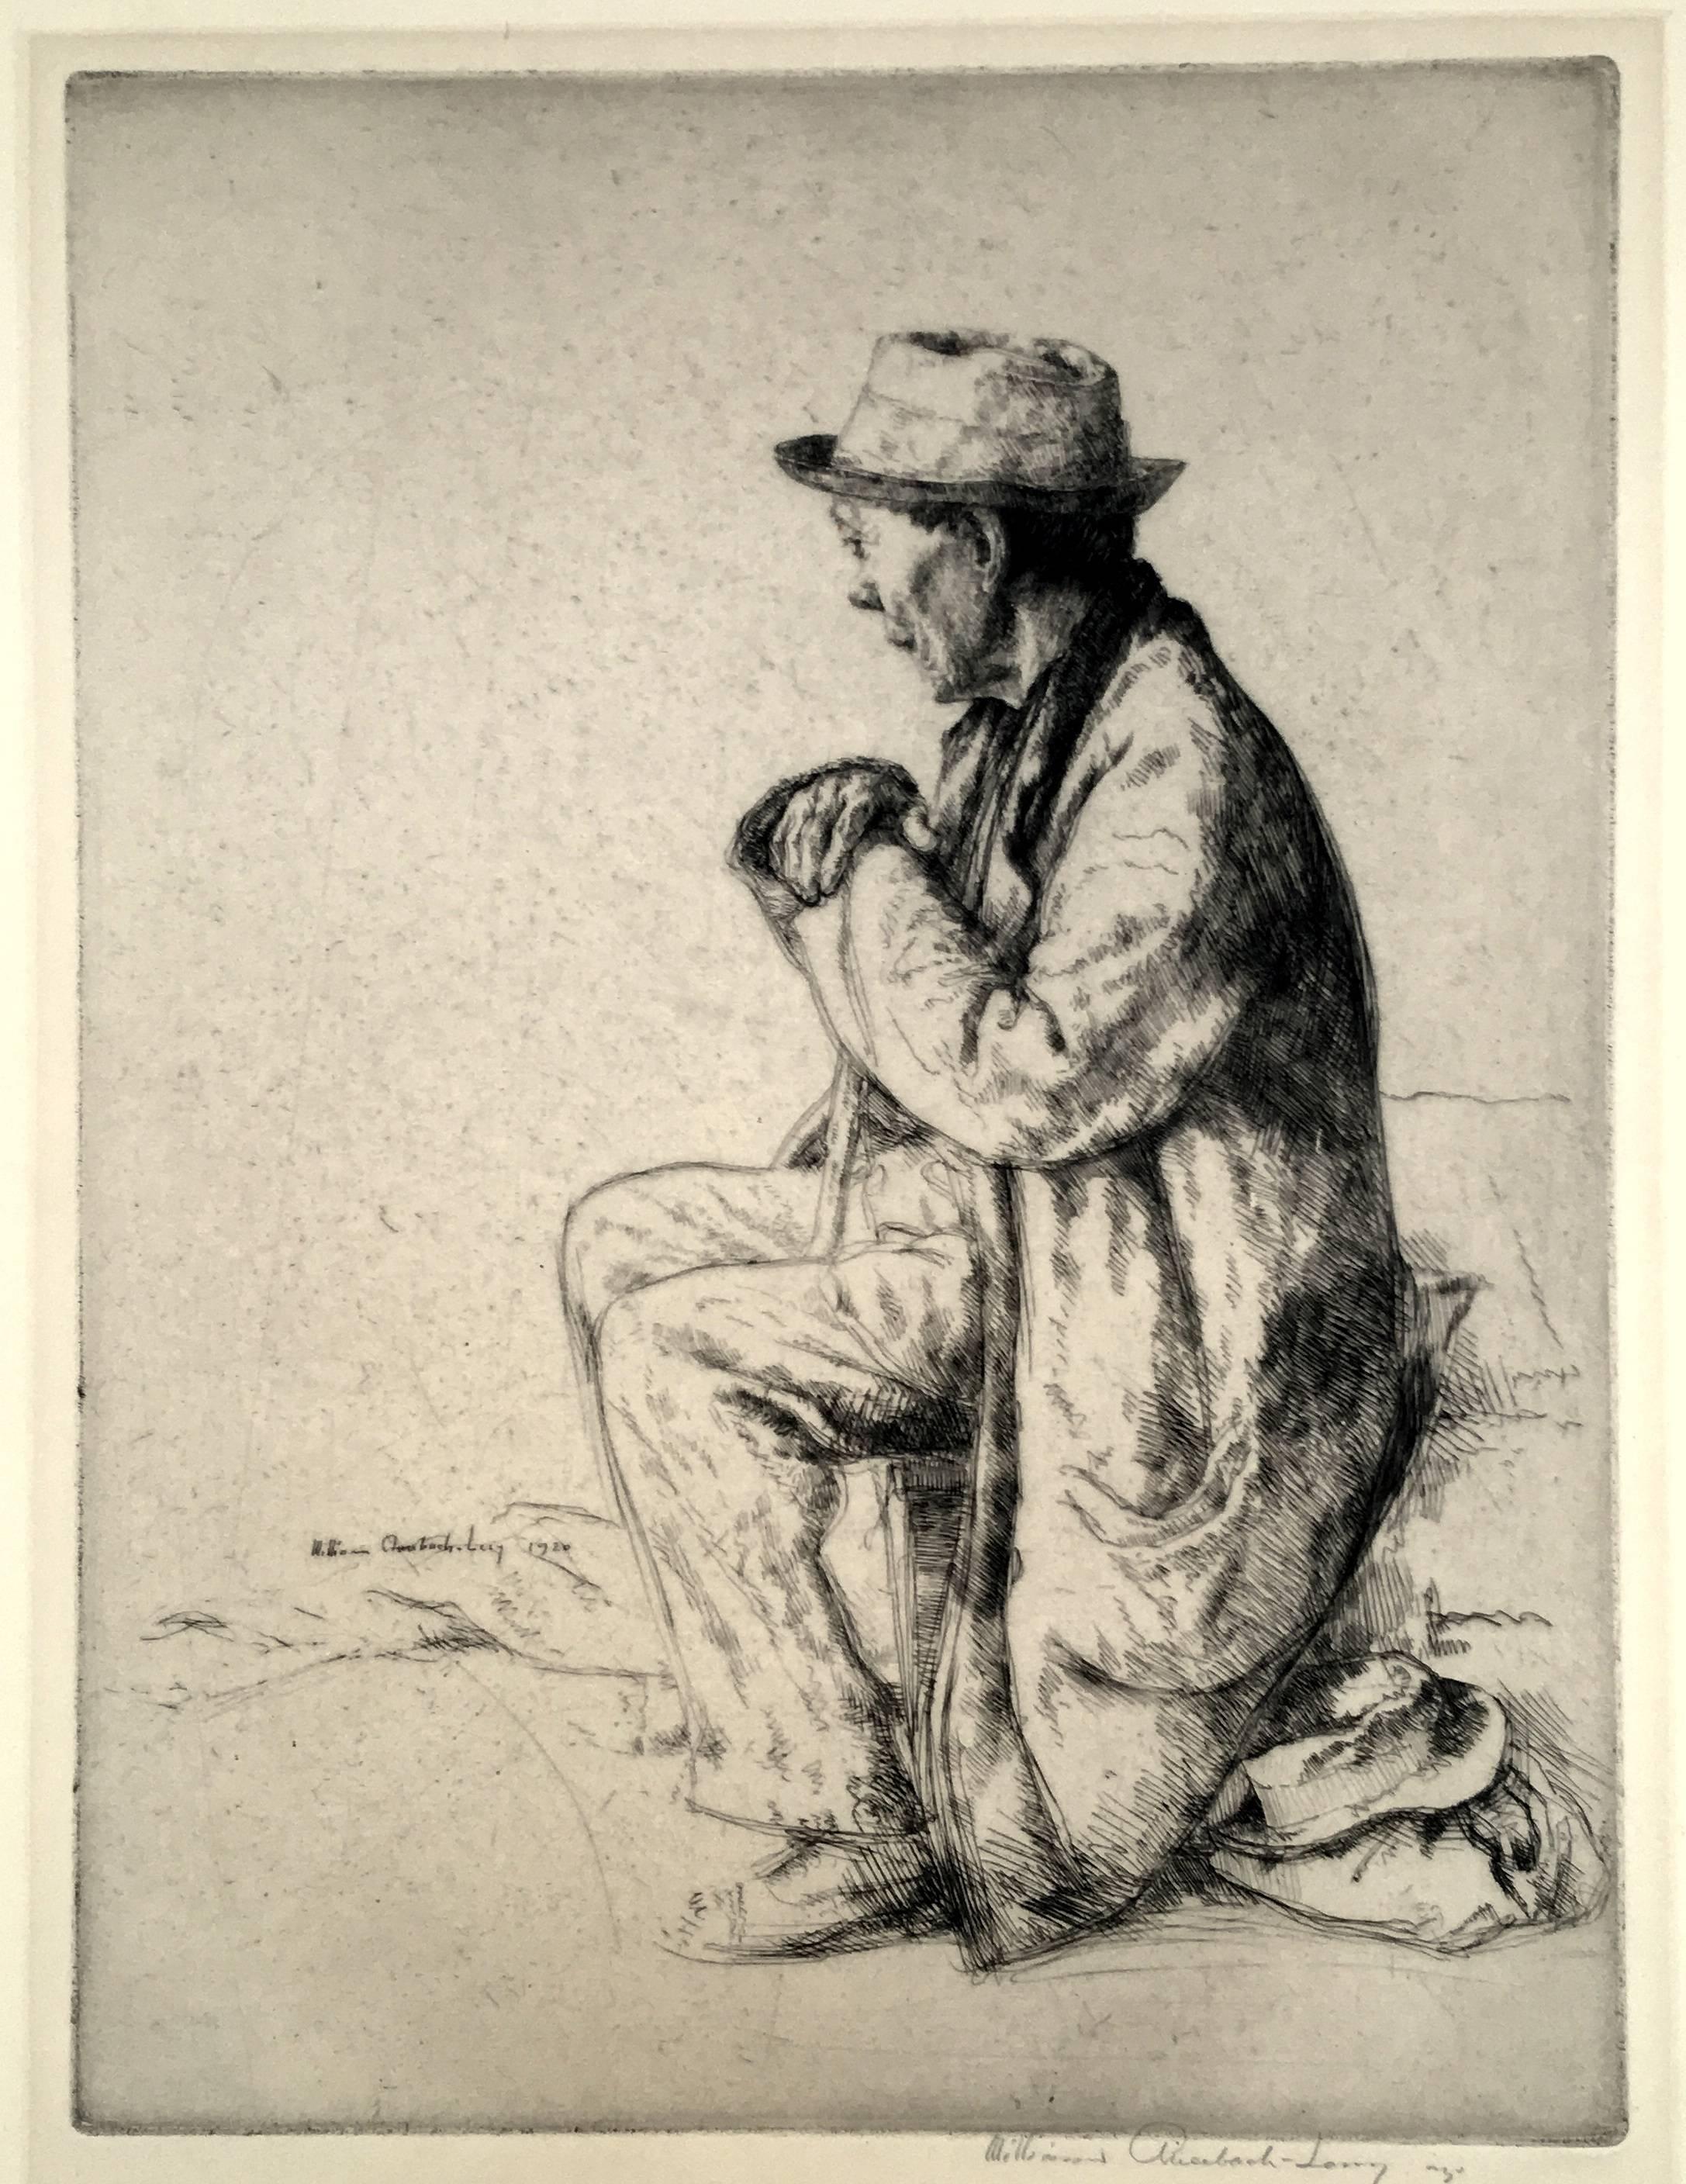 William Auerbach-Levy Figurative Print - The Traveler (also The Emmigrant, Marchant des’habits)